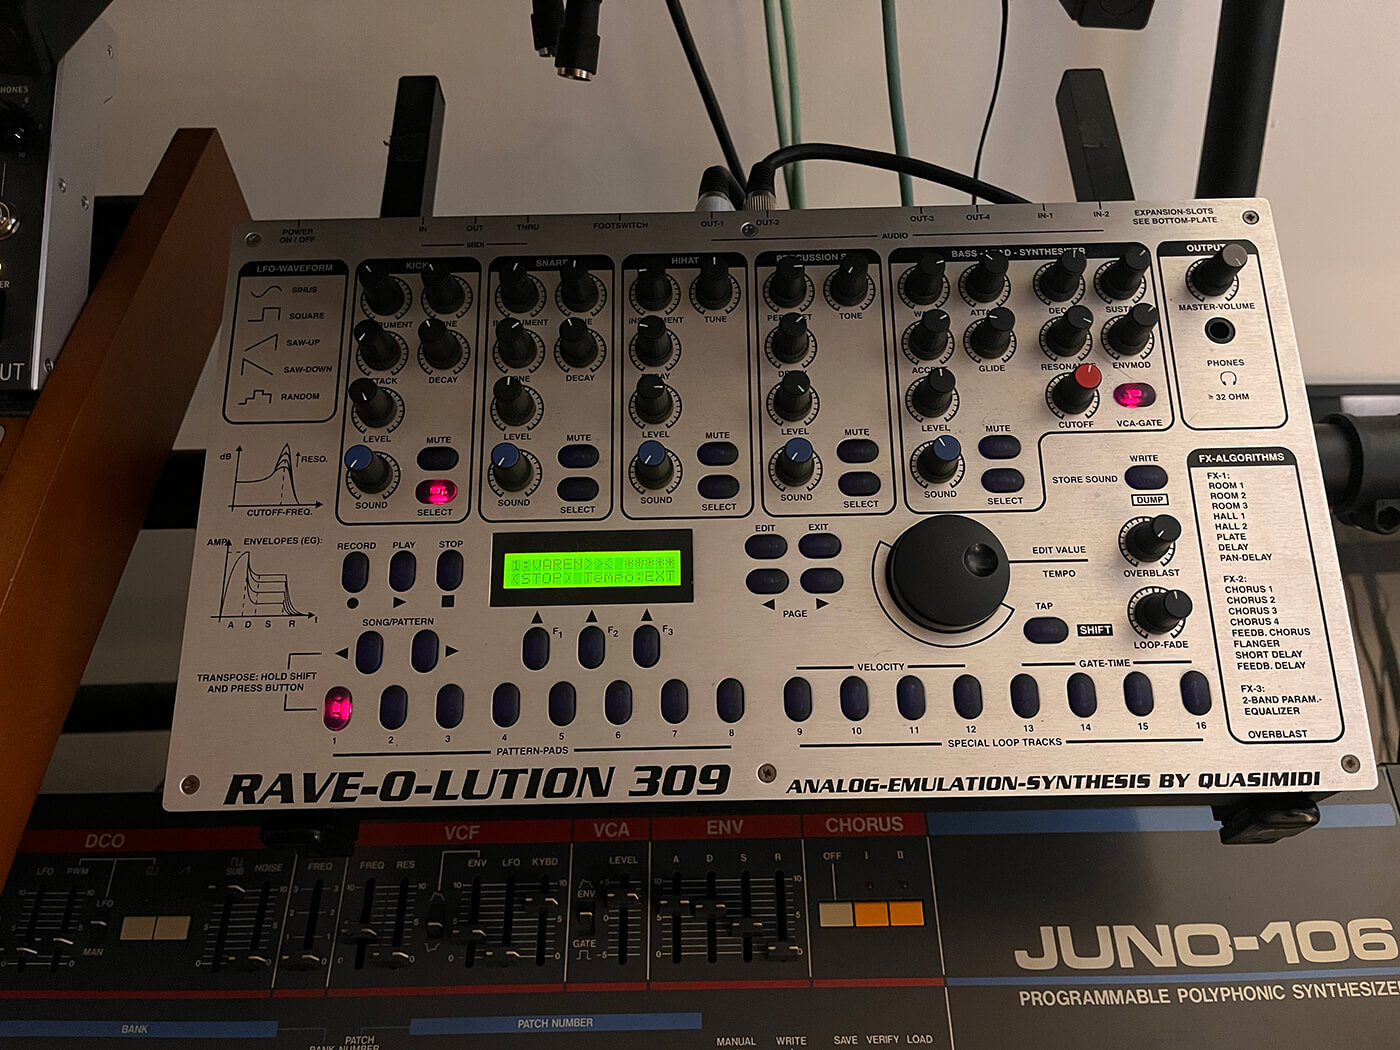 Rave-O-lution 309 in Maison Blanche’s studio